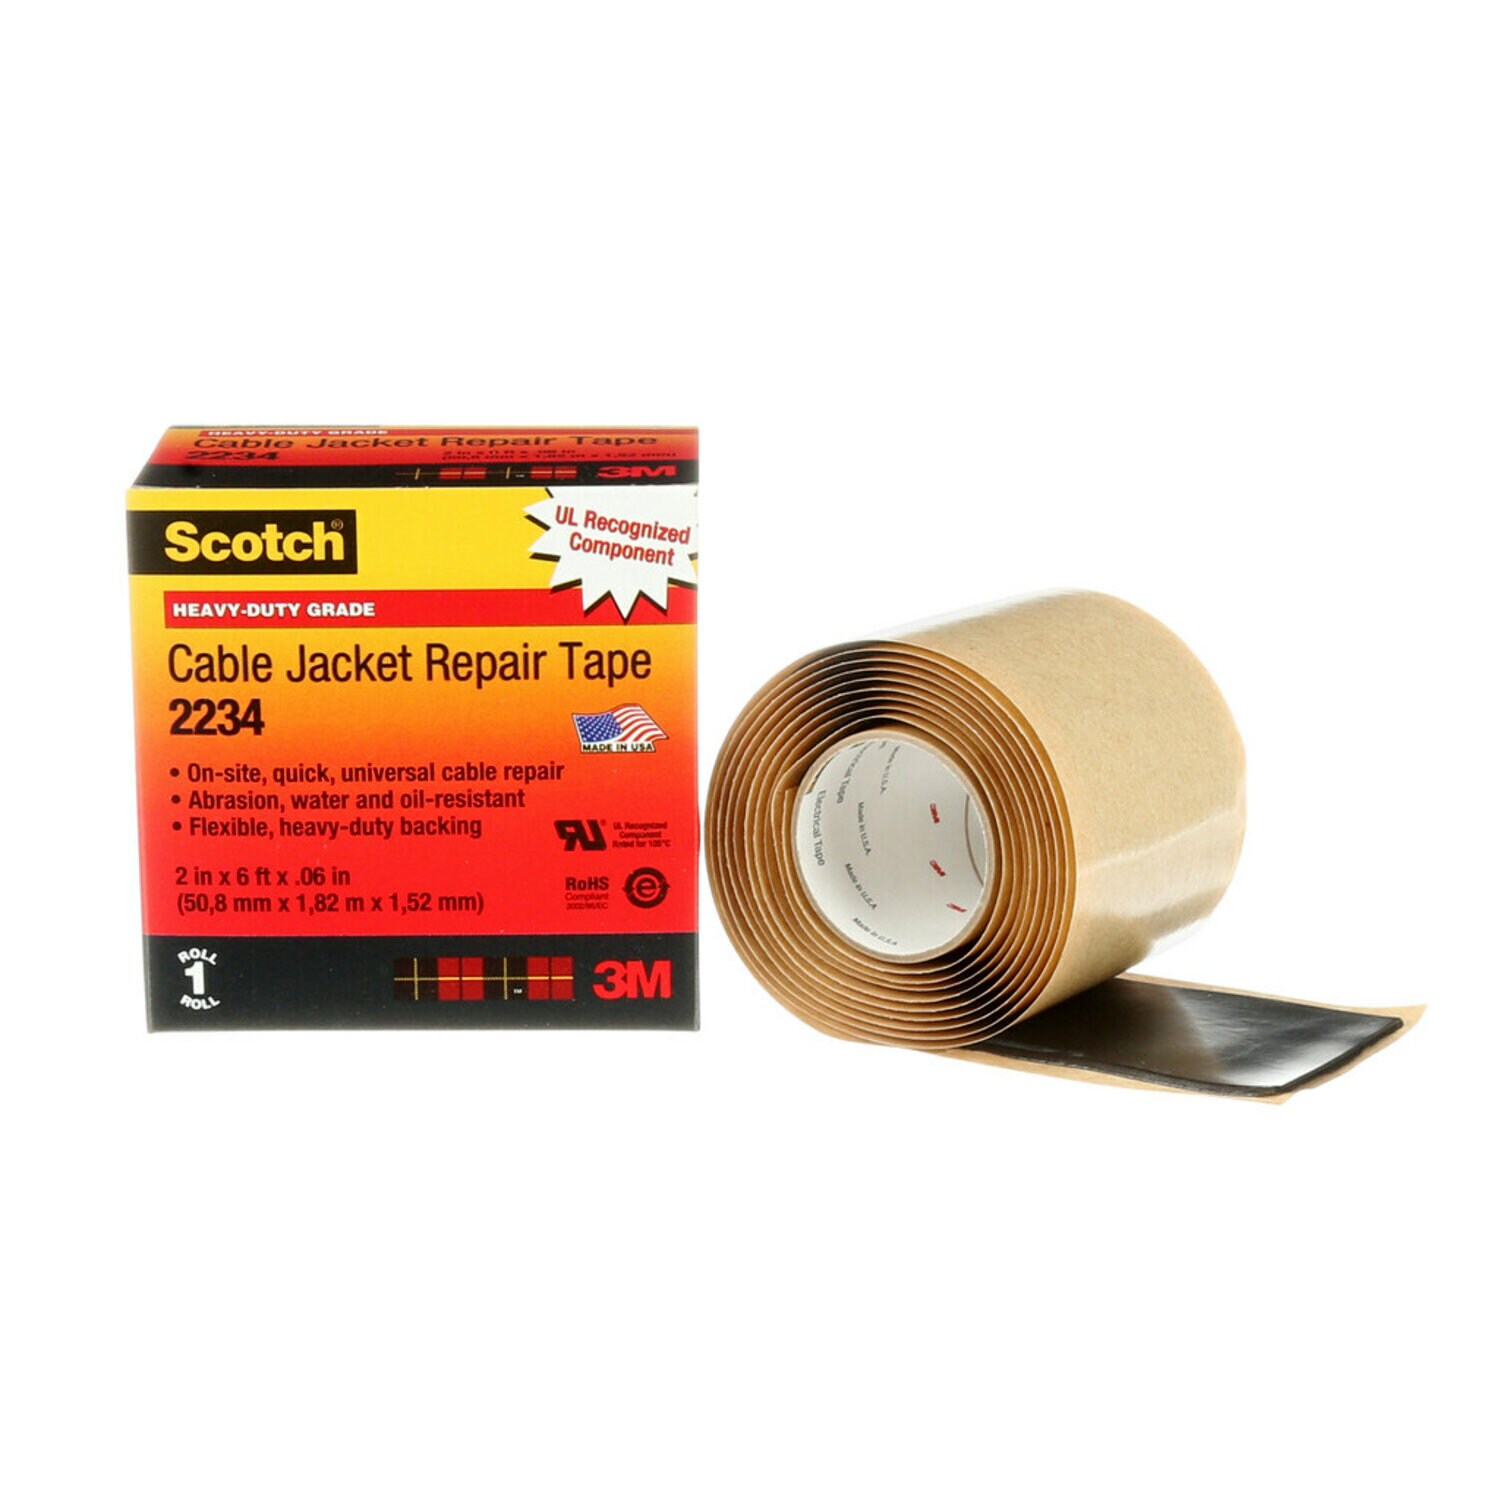 7000006227 - Scotch Cable Jacket Repair Tape 2234, 2 in x 6 ft, Black, 1
roll/carton, 10 rolls/Case